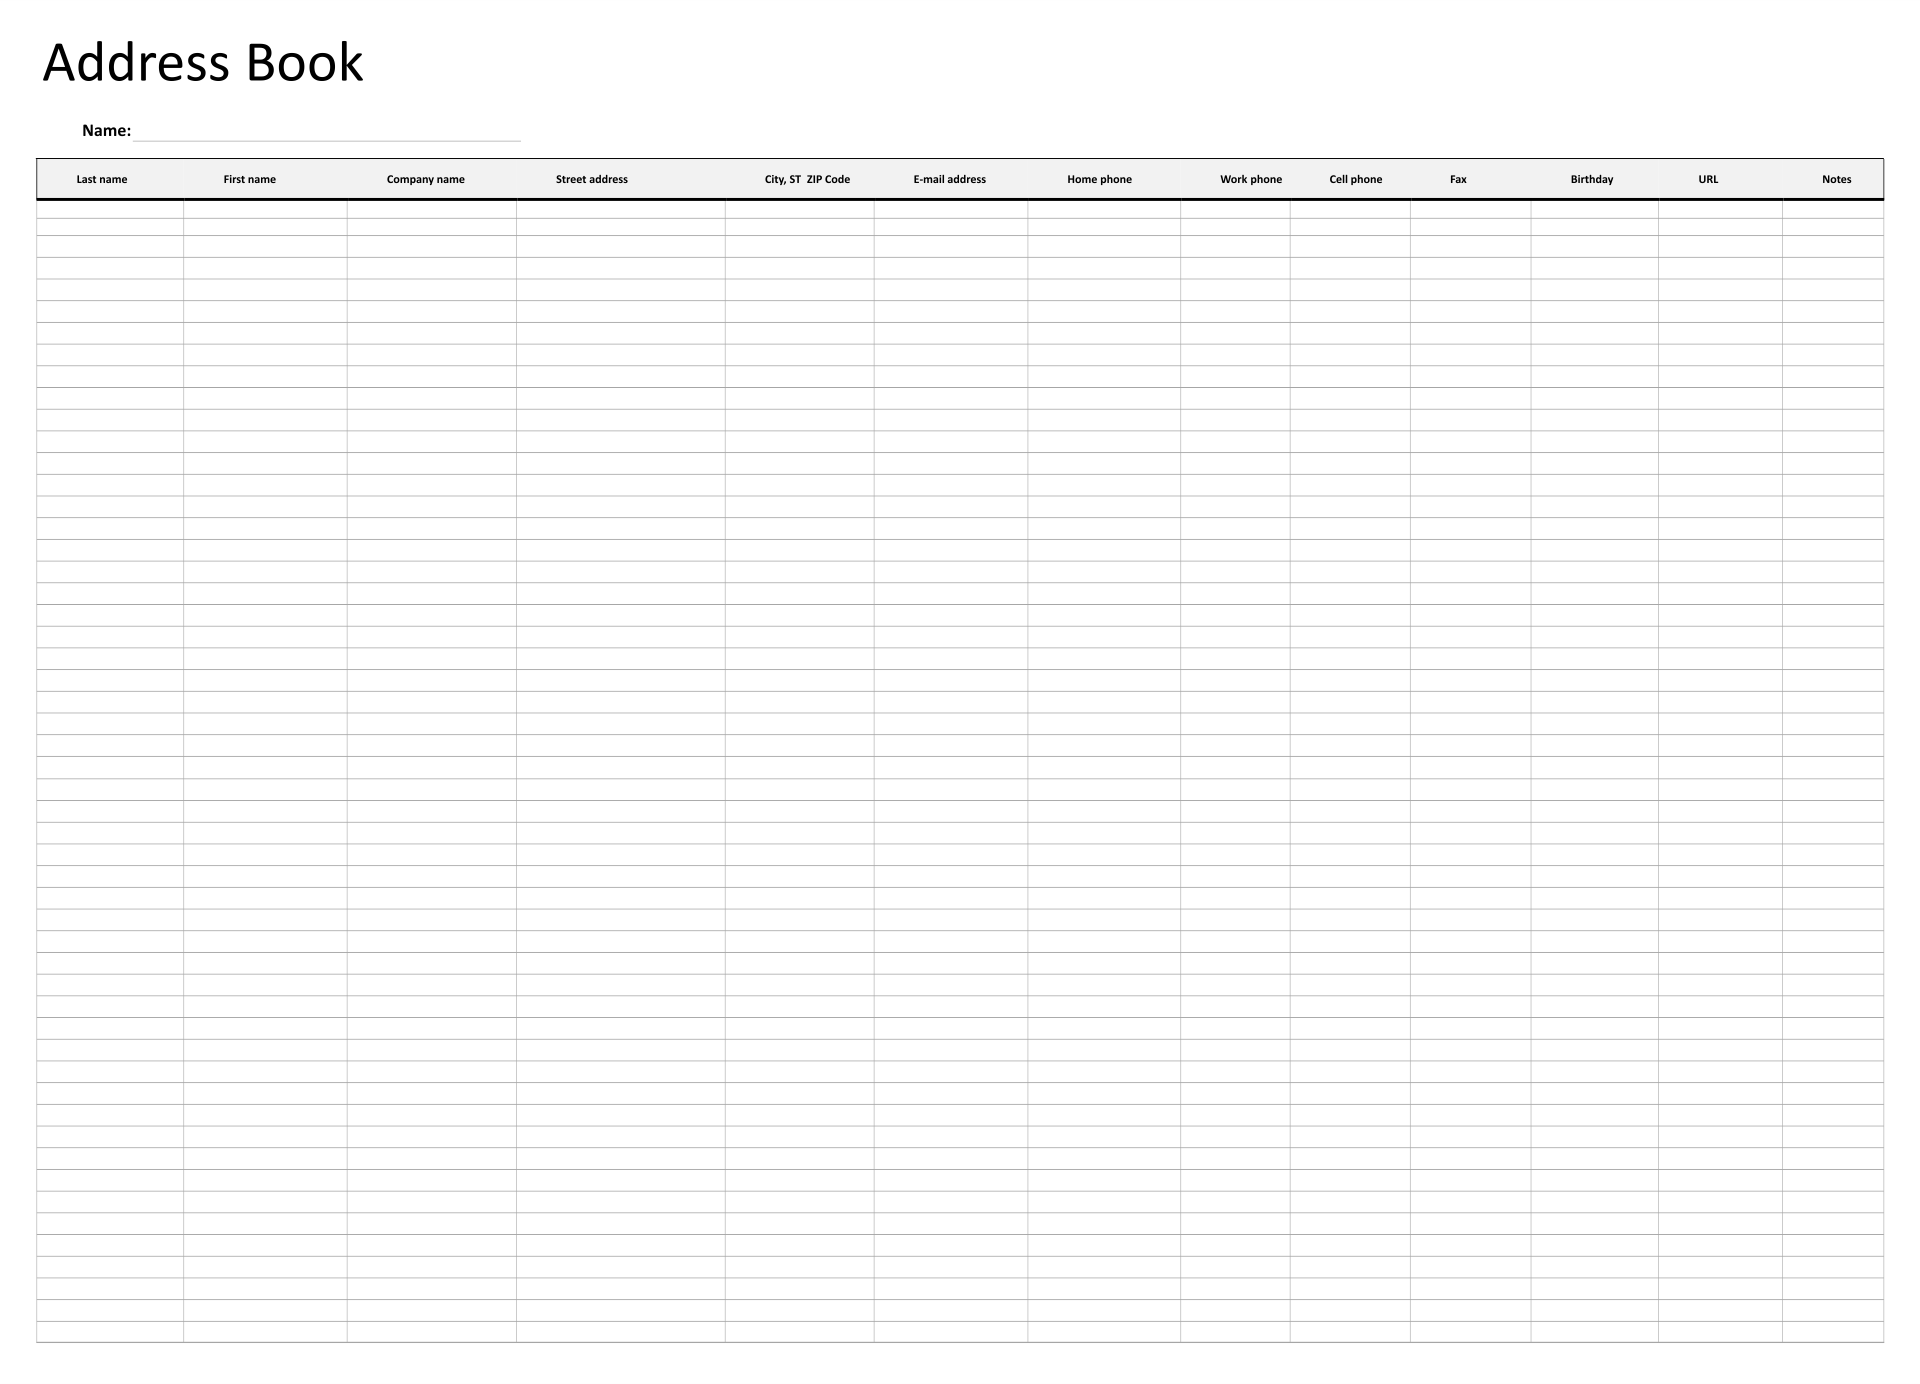 Address Book Template In Excel Printable